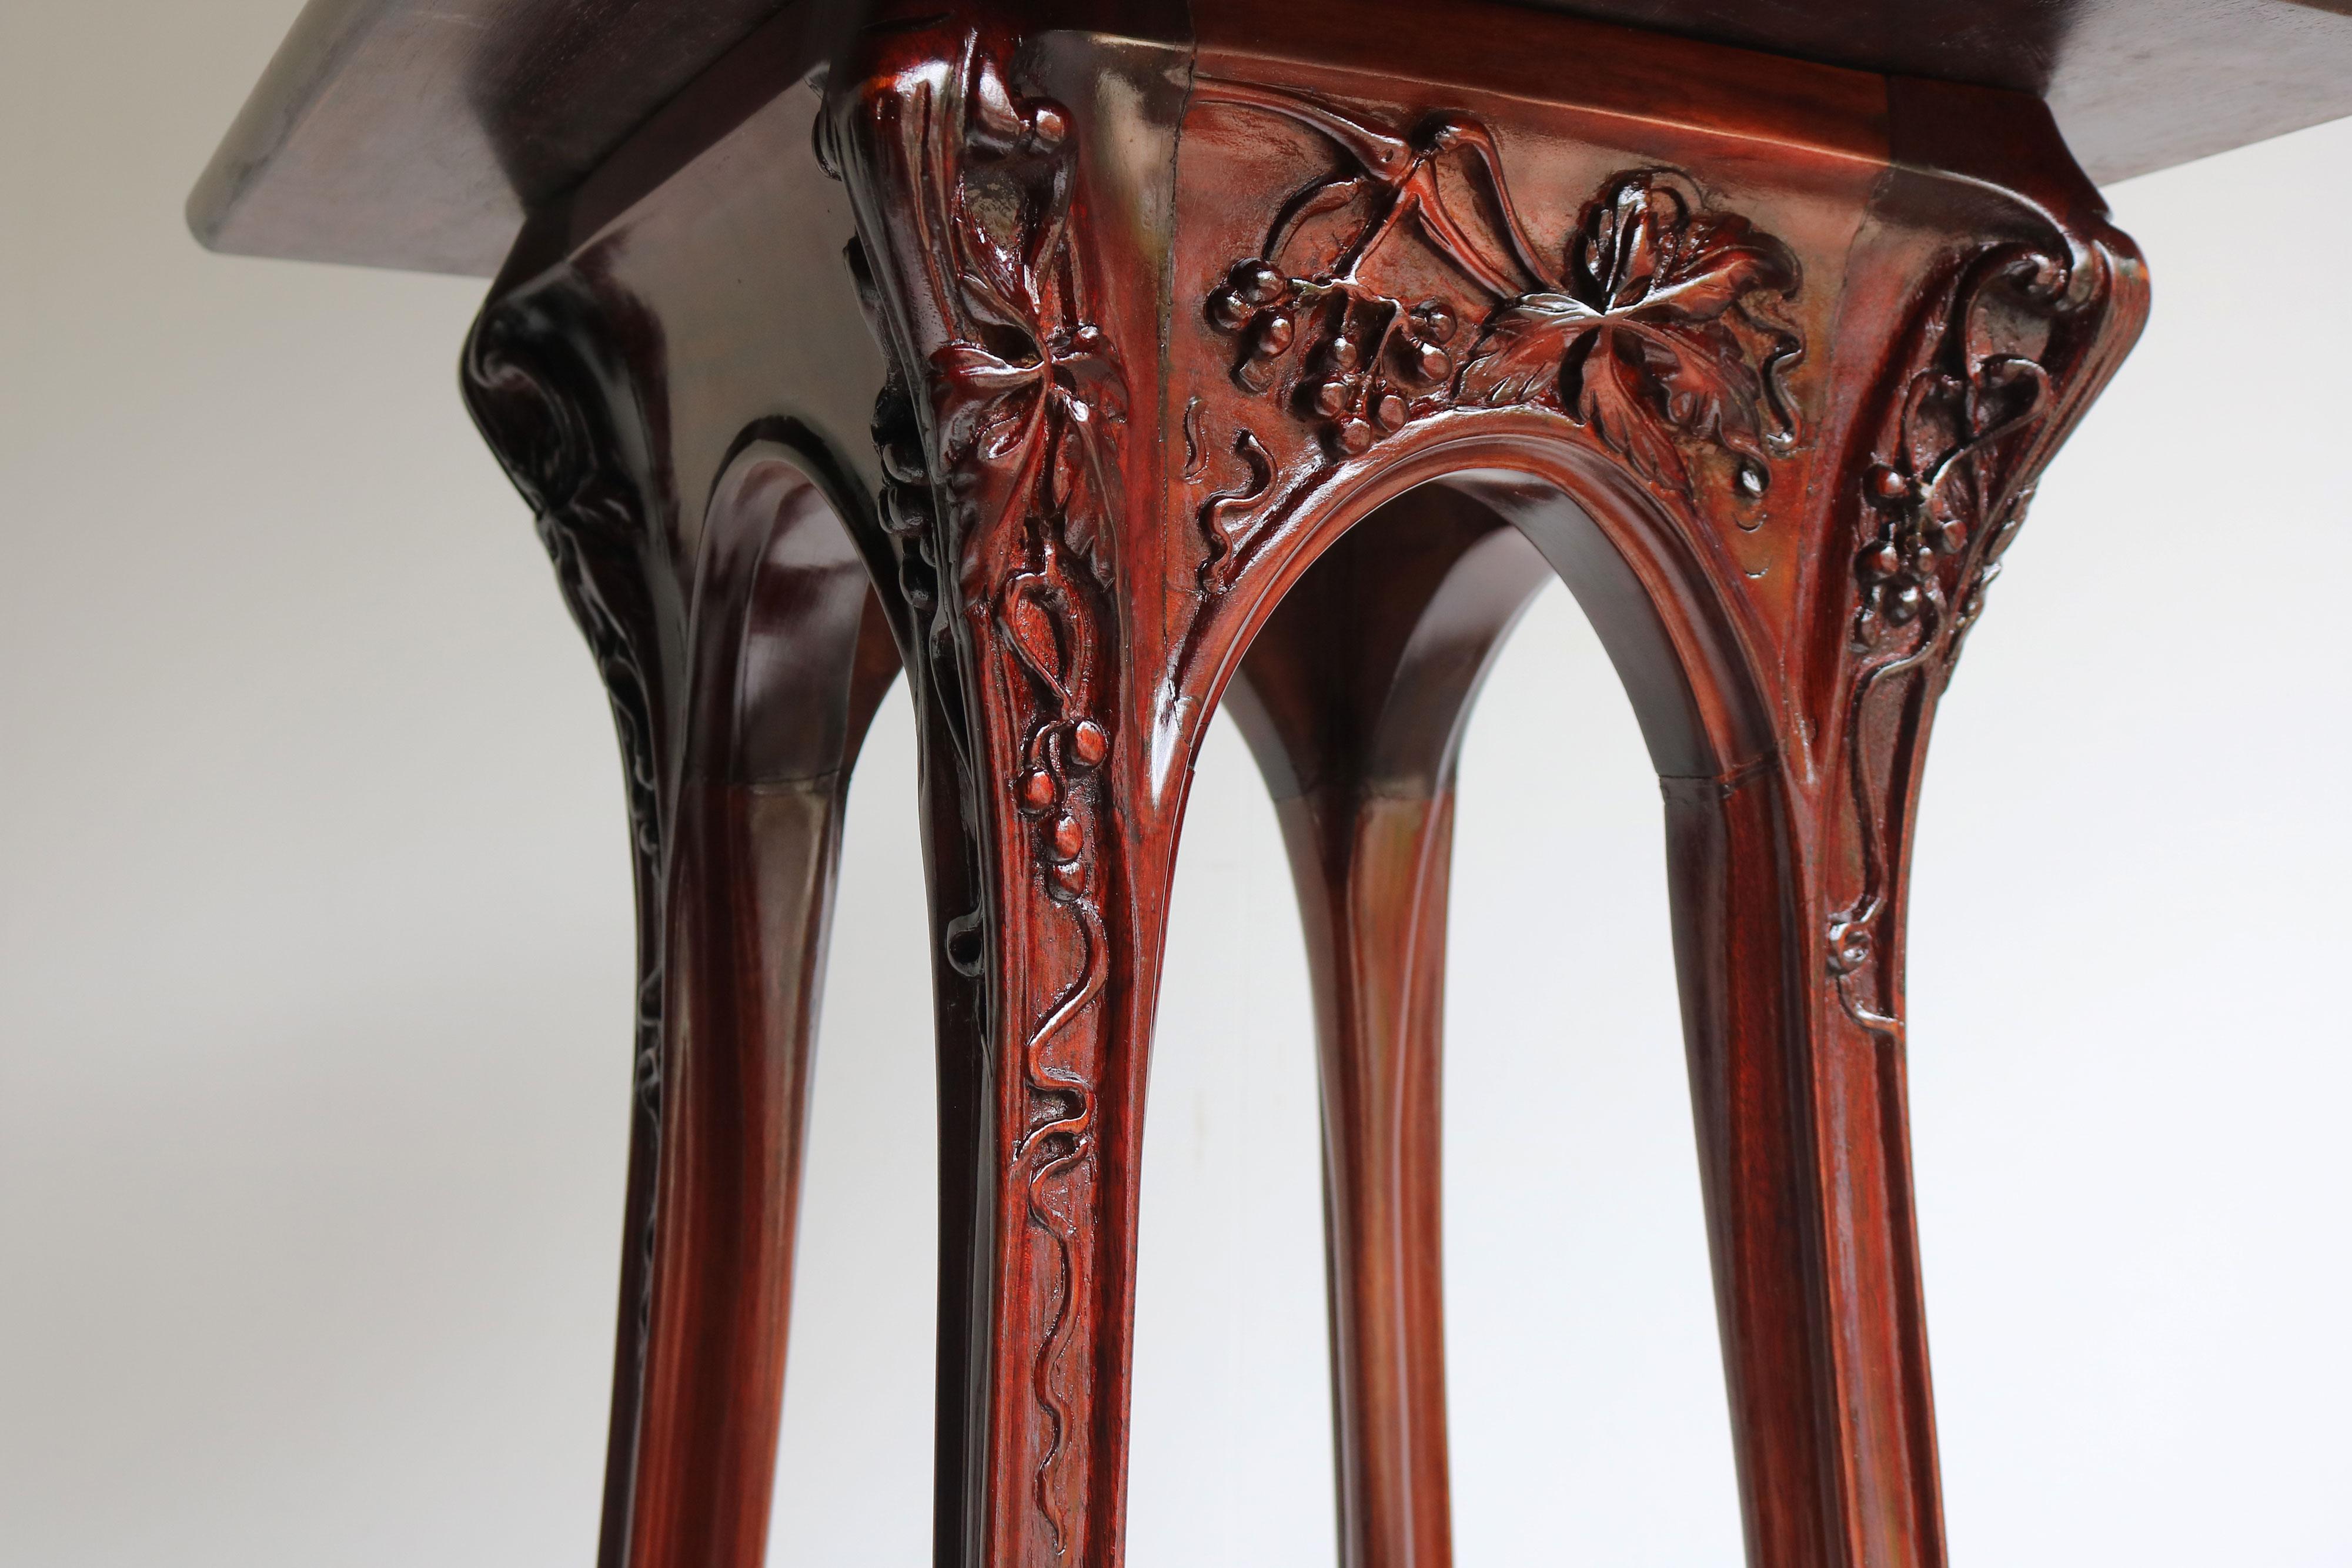 Exquisite pair of stylized Art Nouveau plant stands / pedestals by Louis Majorelle designed in 1907 with carved ''Vigne Vierge'' decorations. 
Each pedestal has 3 tiers and the top tiers rotate 360 degrees. Exquisite crafted and fully hand carved